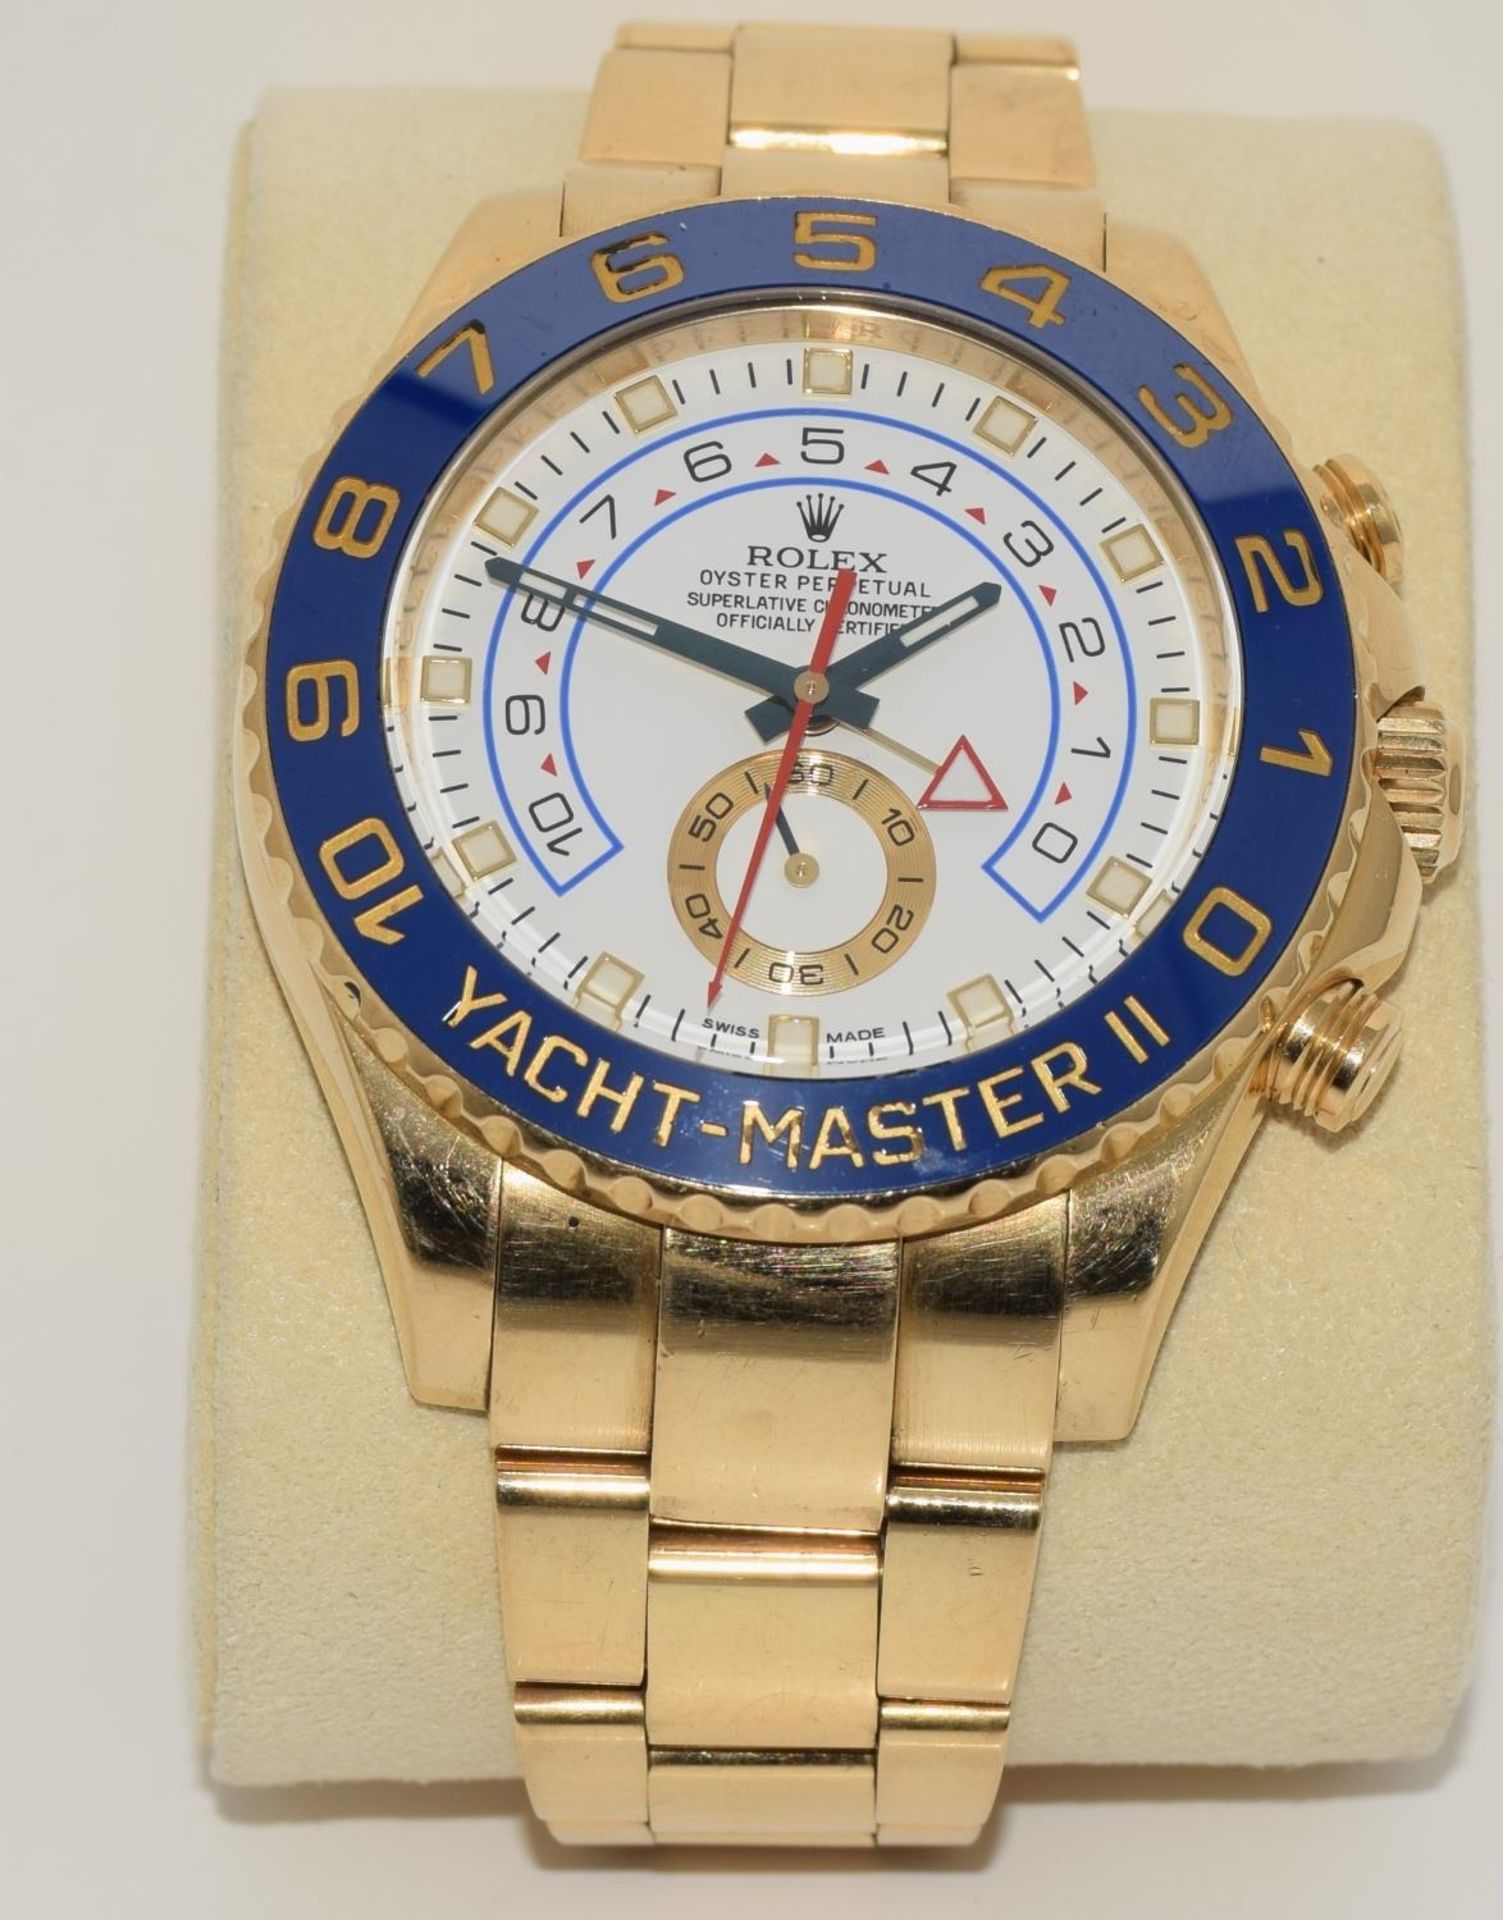 2014 Rolex Yachtmaster II 18ct gold ref 116688, boxed and papers. (ref 20) - Image 2 of 9